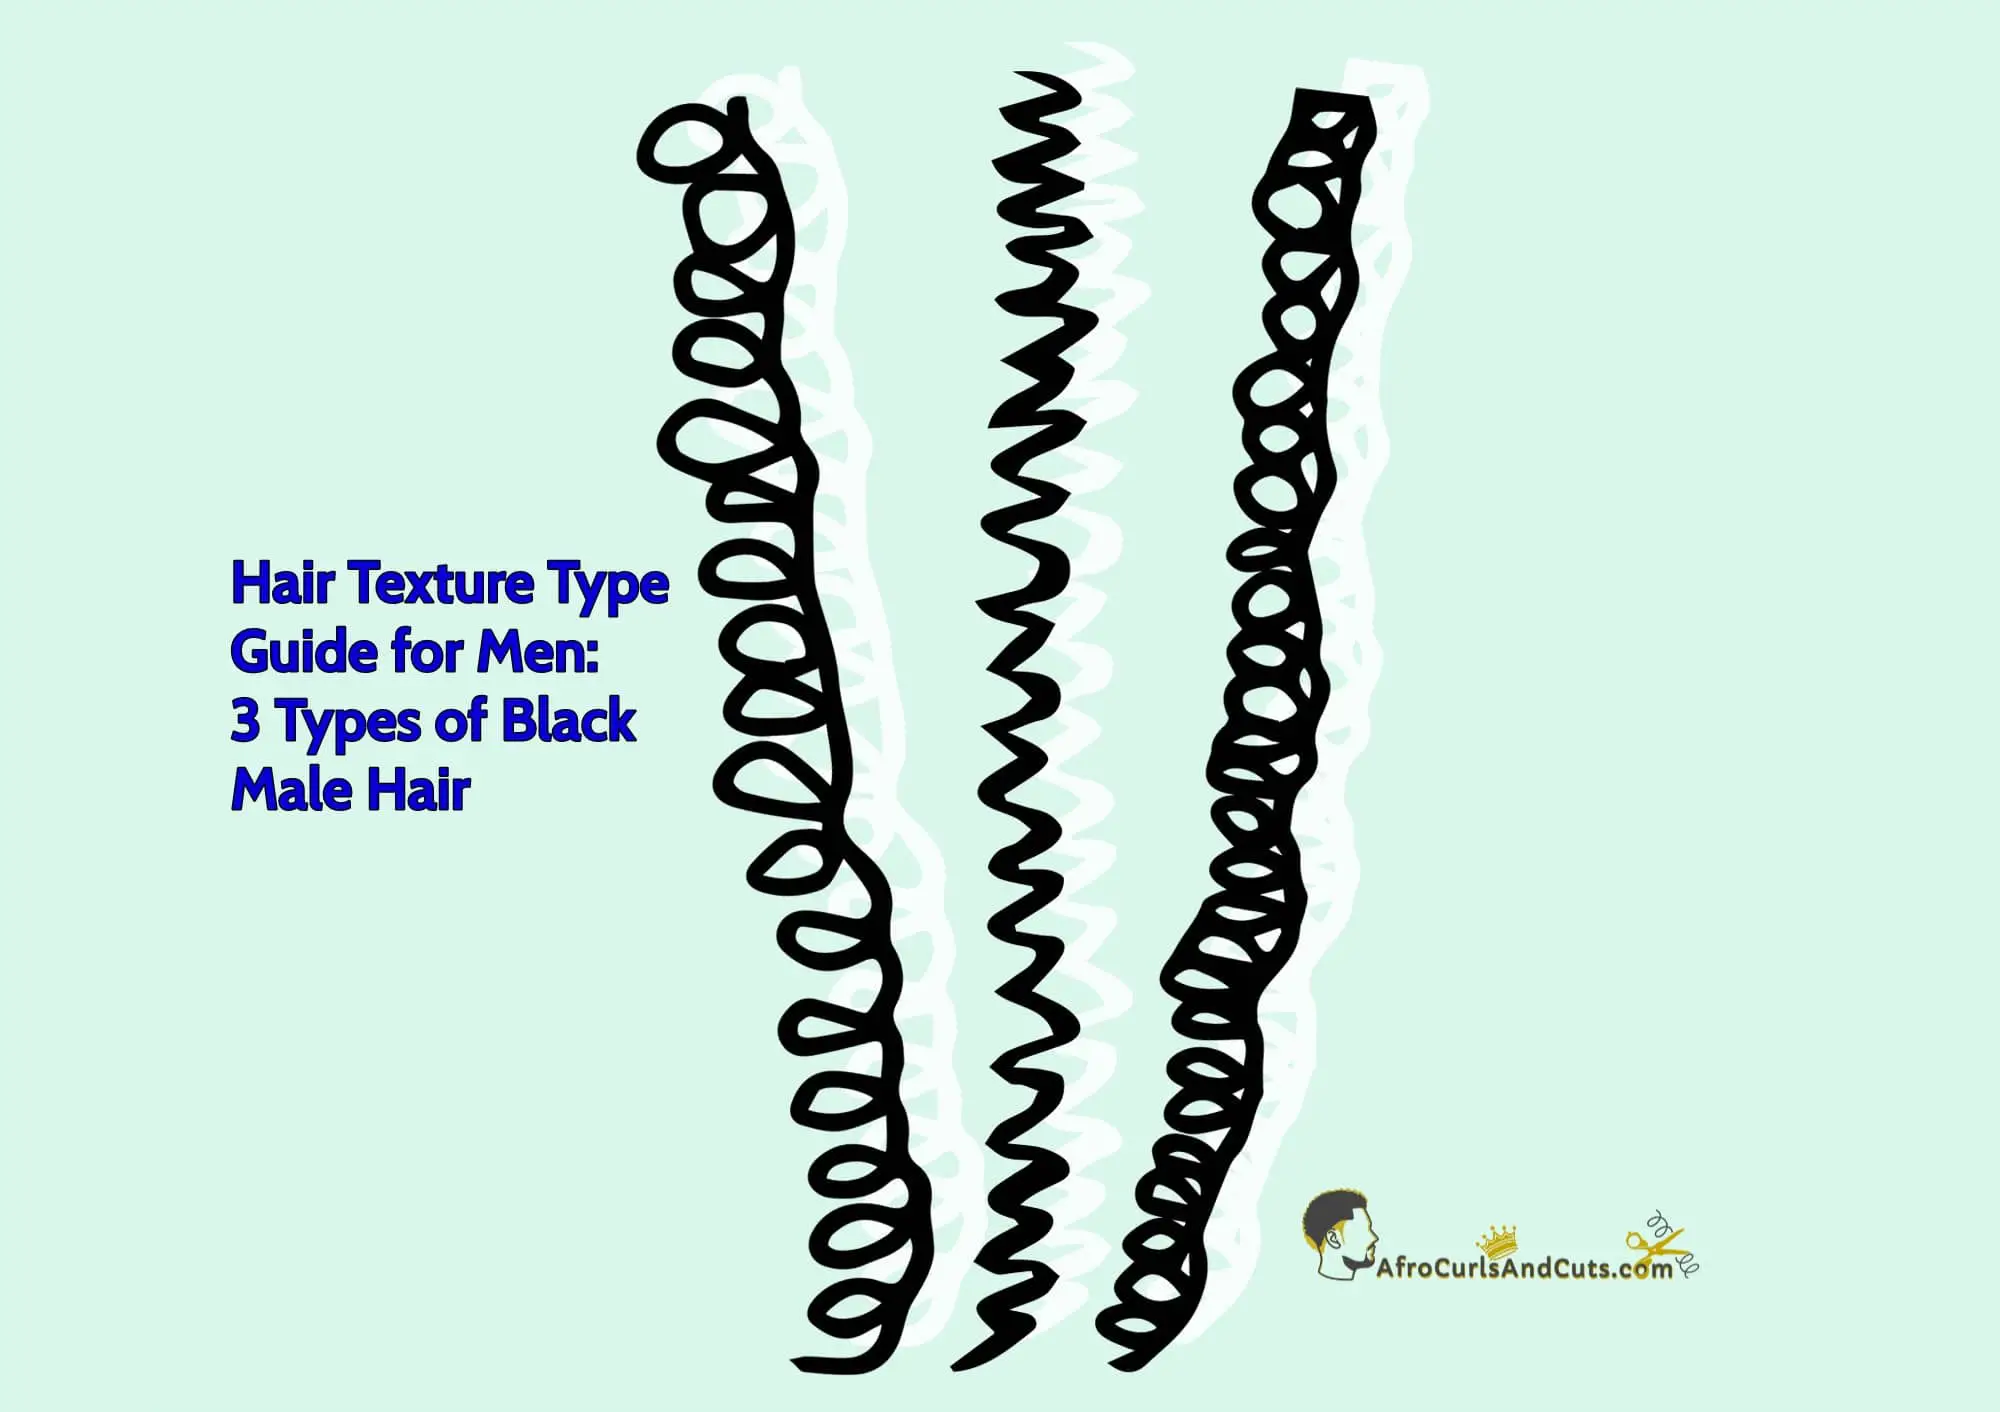 Black Hair Types: Guide to Spot the 3 Black Male Hair Types Fast!